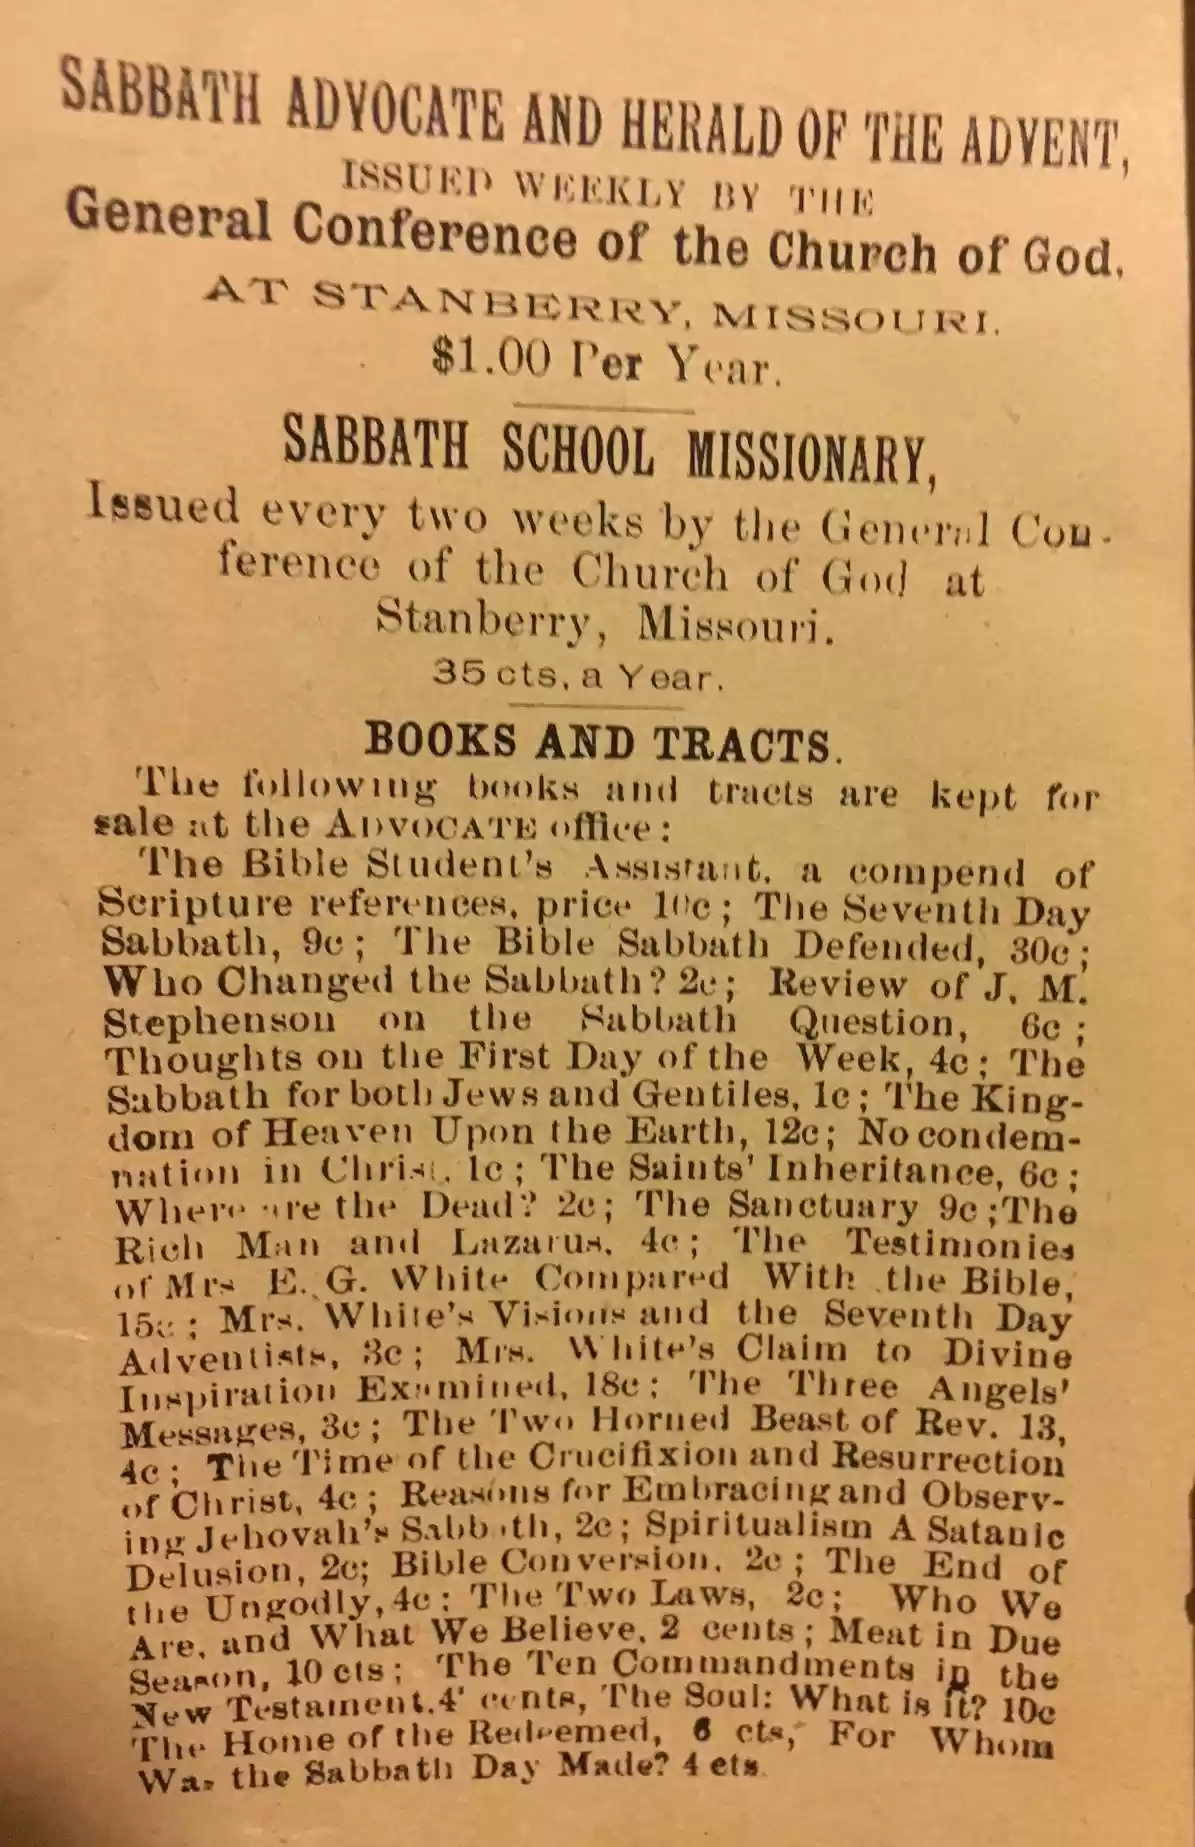 List of Tracts in Discussion on the Destruction of the Wicked Cover(1893)